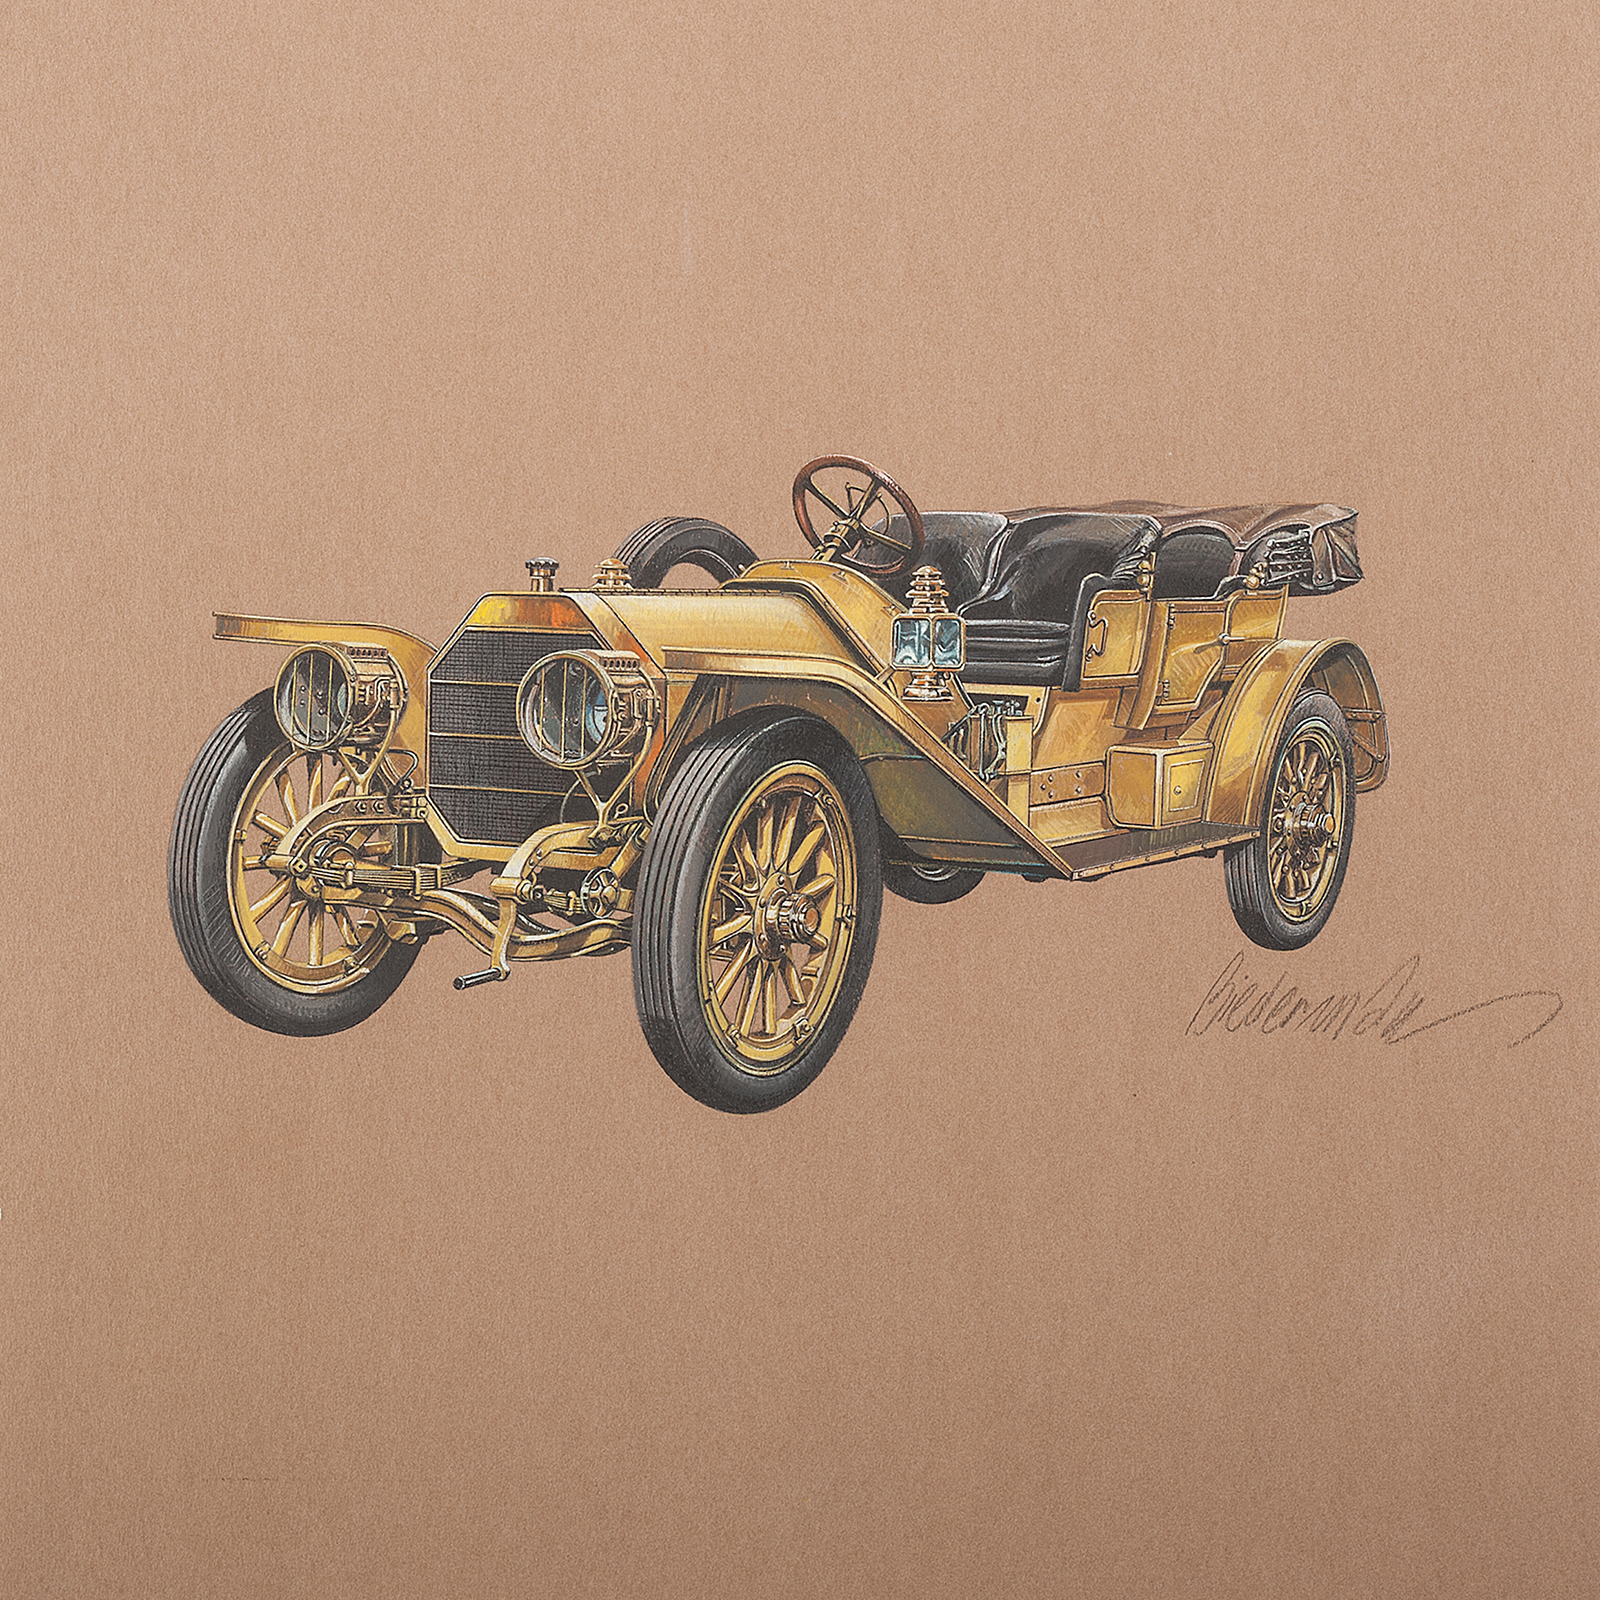 1909 Locomobile 30 Baby Tonneau Touring: Illustrated by Jerome D. Biederman